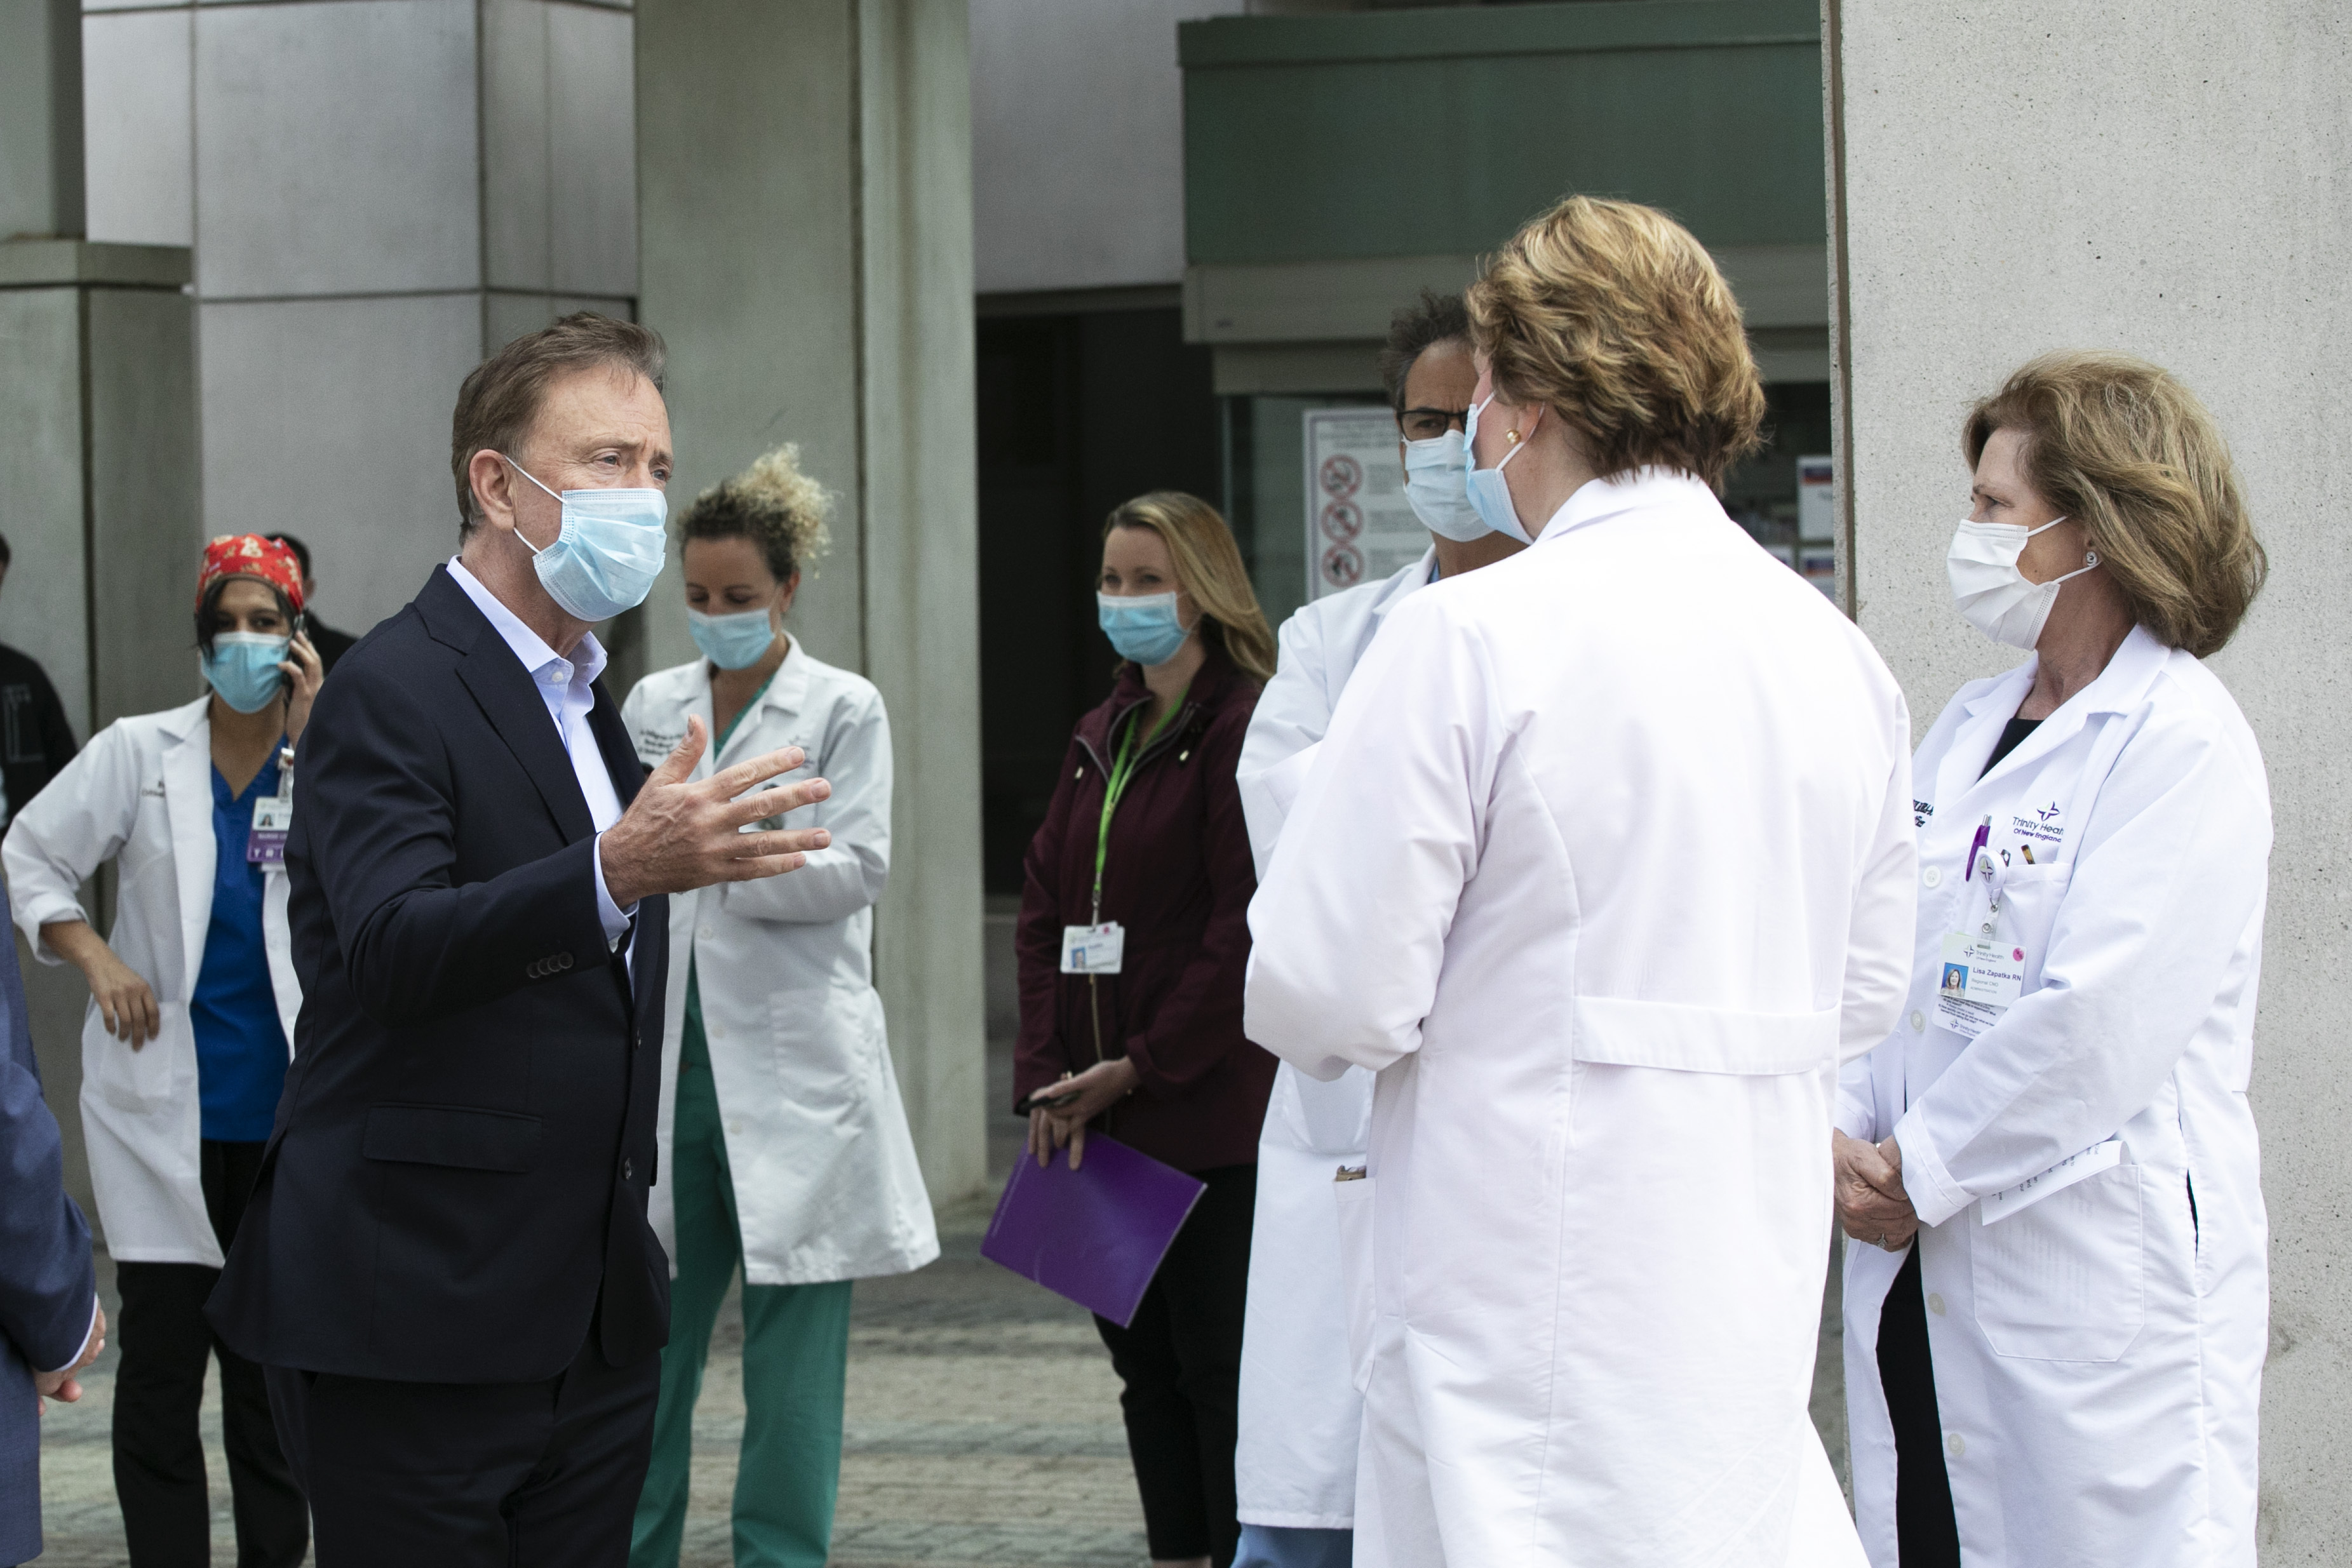 Gov. Ned Lamont, left, talks with medical staff outside Saint Francis Hospital, on May 7, in Hartford, Connecticut.